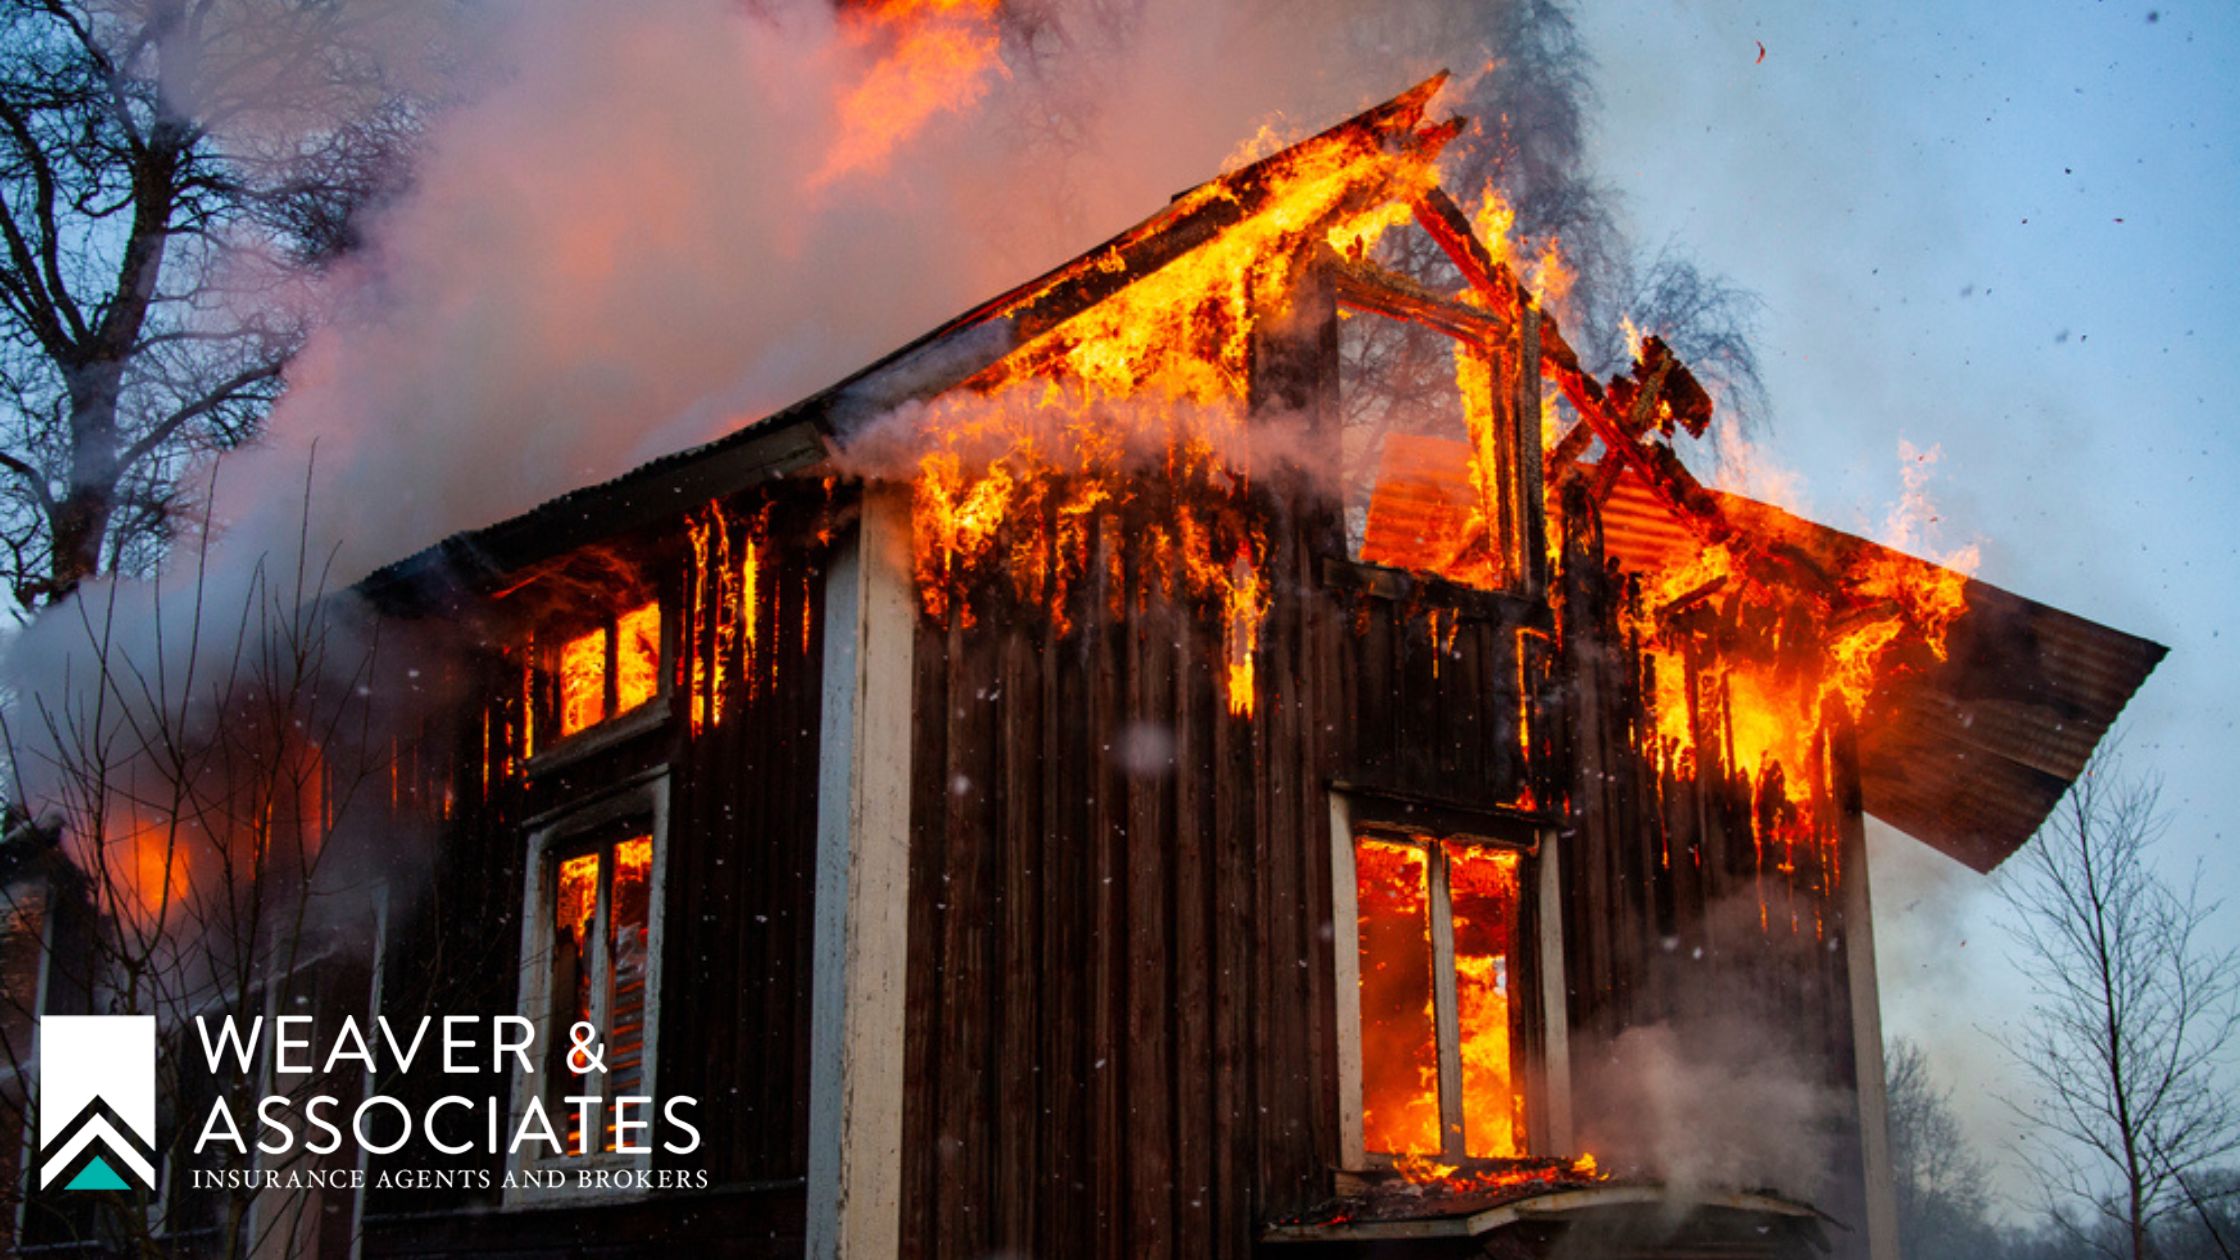 Understanding Homeowners Insurance Coverage for Wildfire Damage from Smoke and Ash